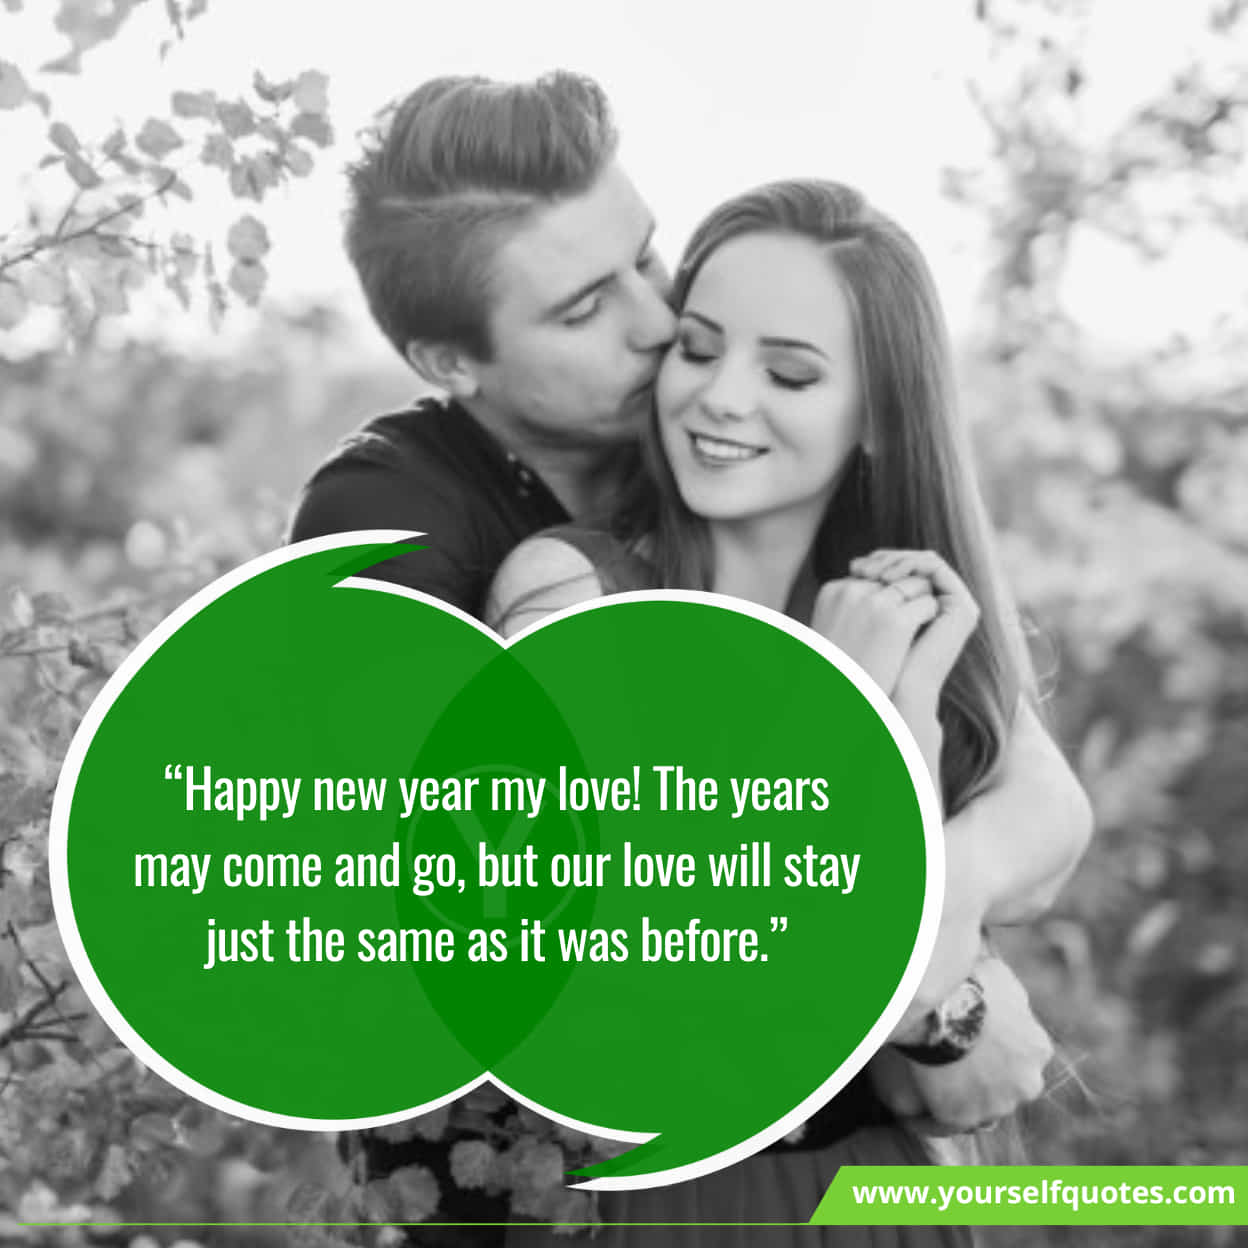 Best Romantic New Year Messages